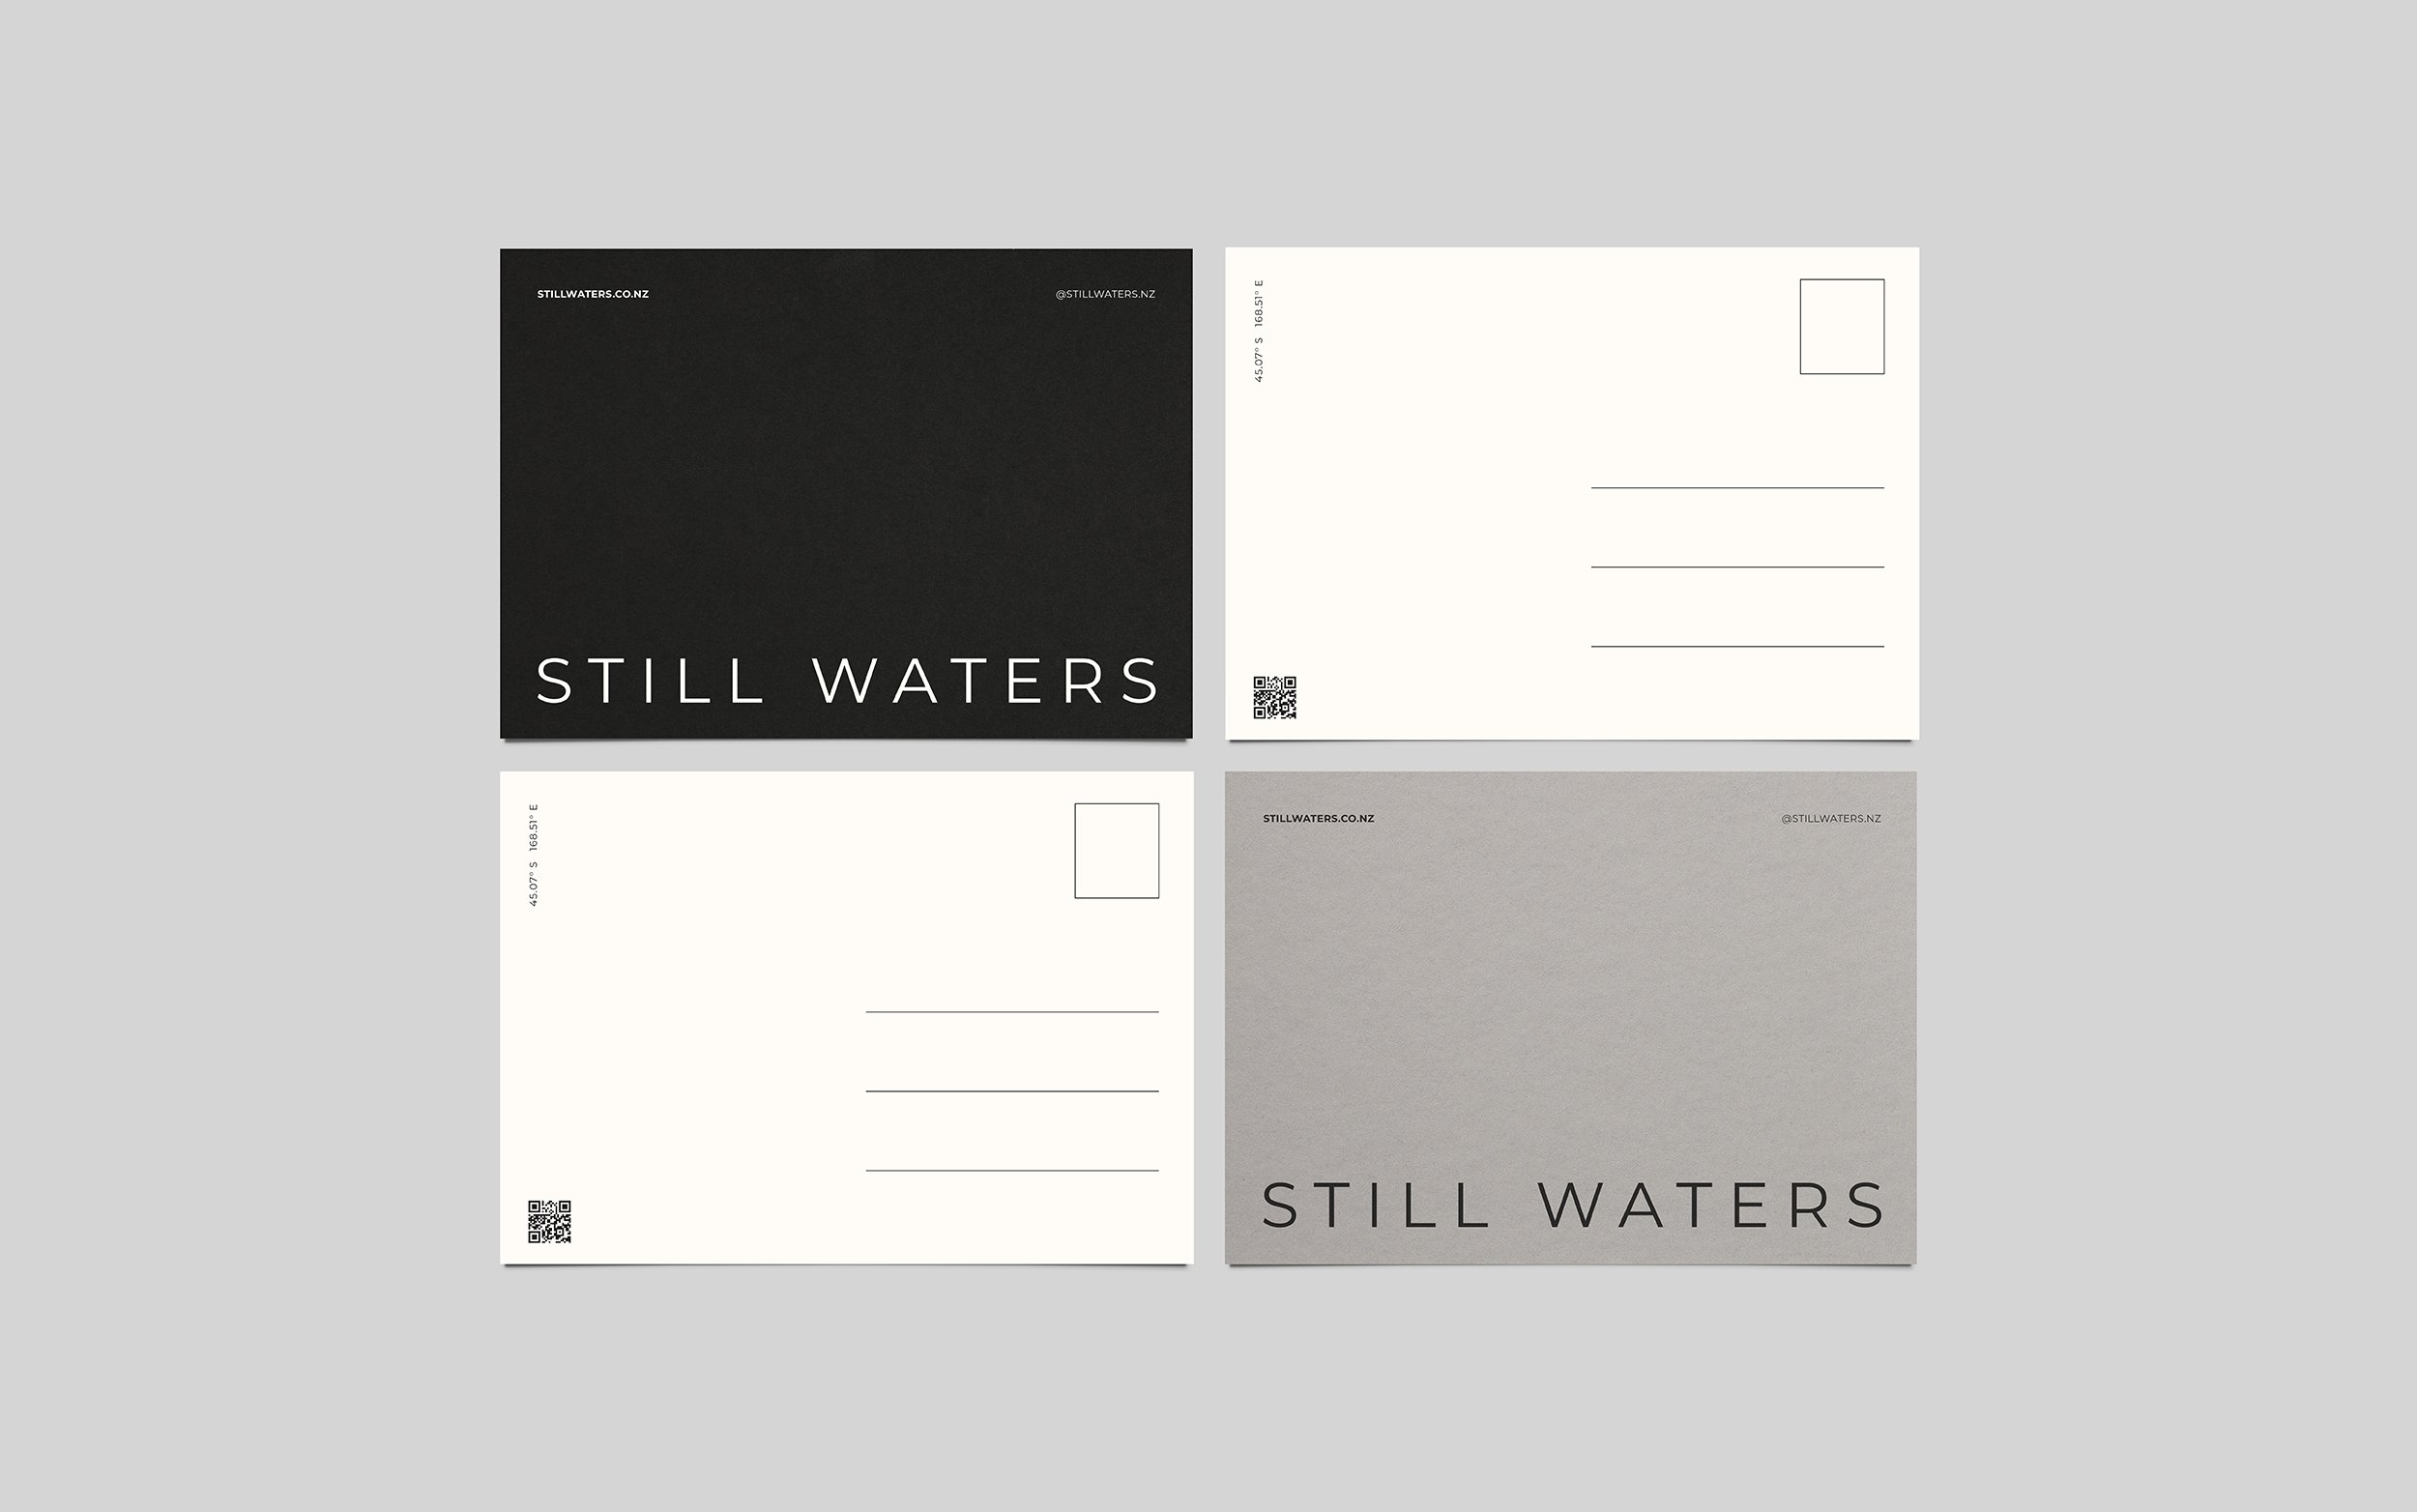 Printed leaflet by Makebardo for New Zealand gin and vodka brand Still Waters